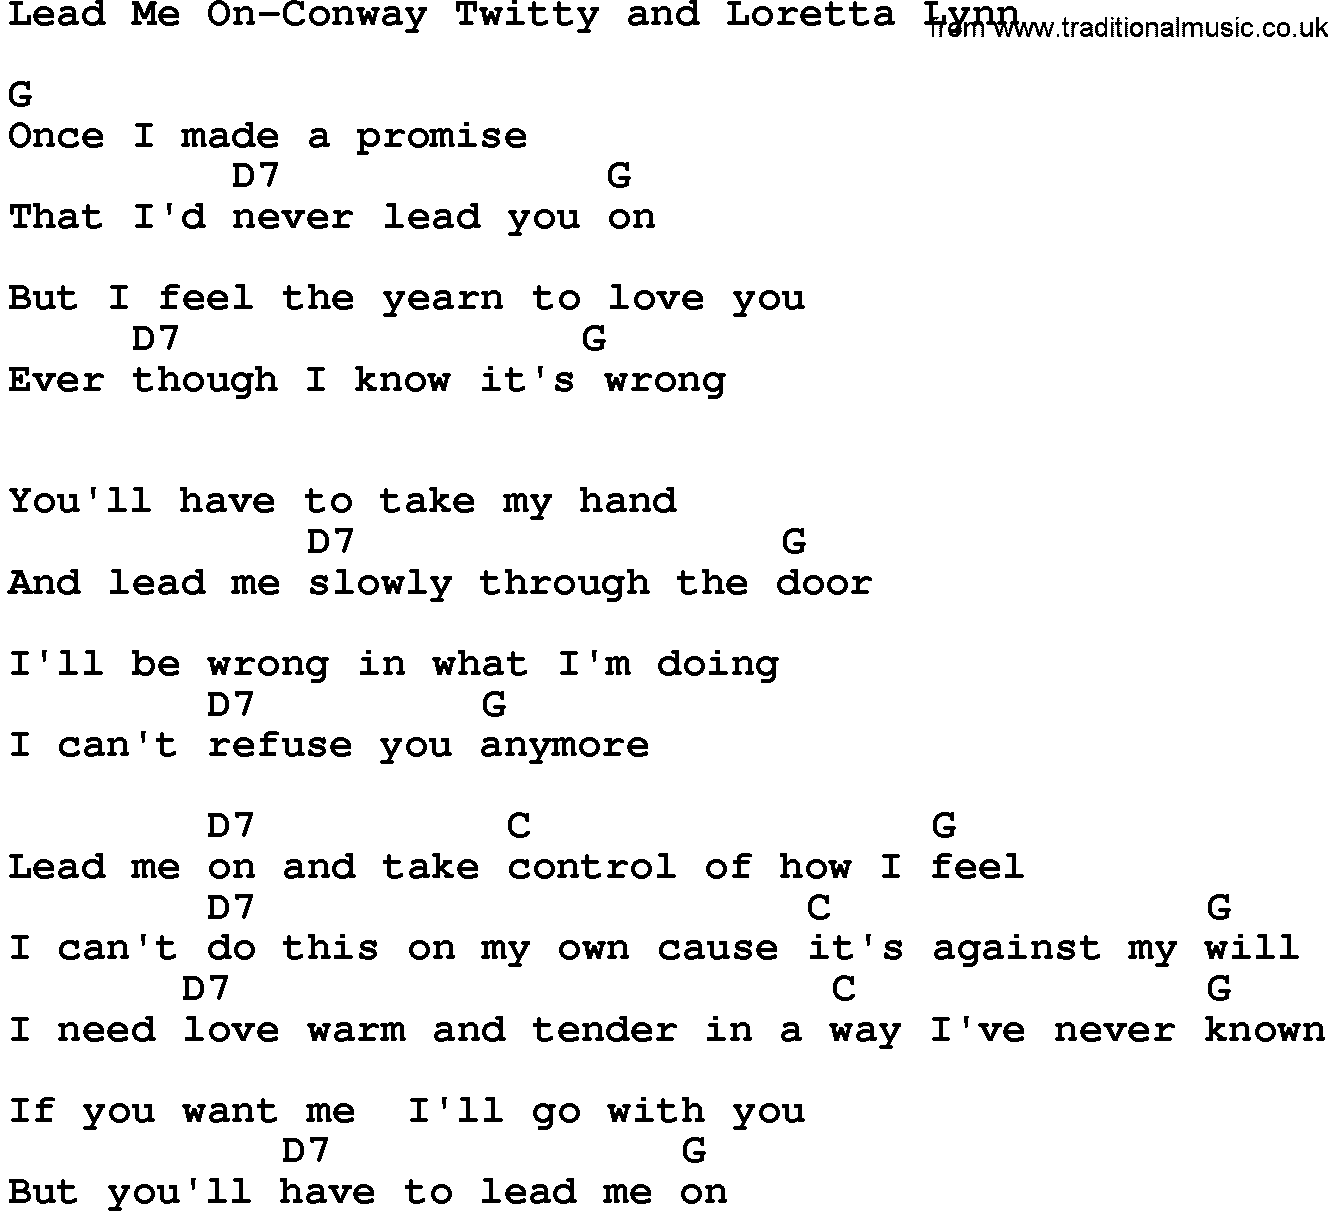 Country music song: Lead Me On-Conway Twitty And Loretta Lynn lyrics and chords